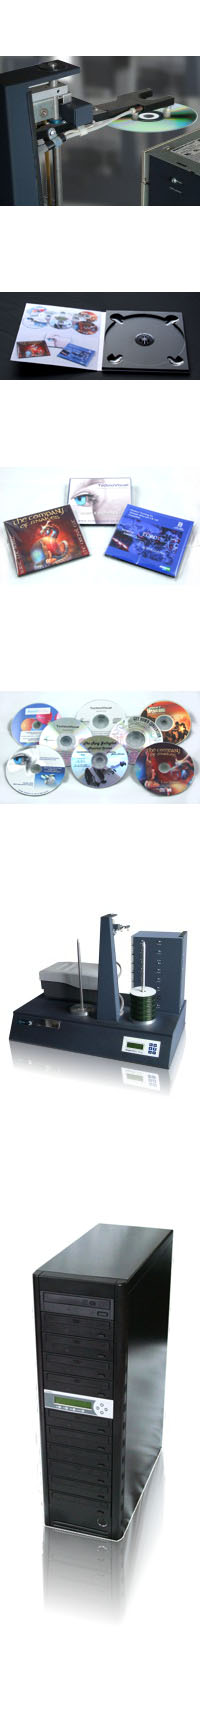 CD & DVD Duplication and Printing Services